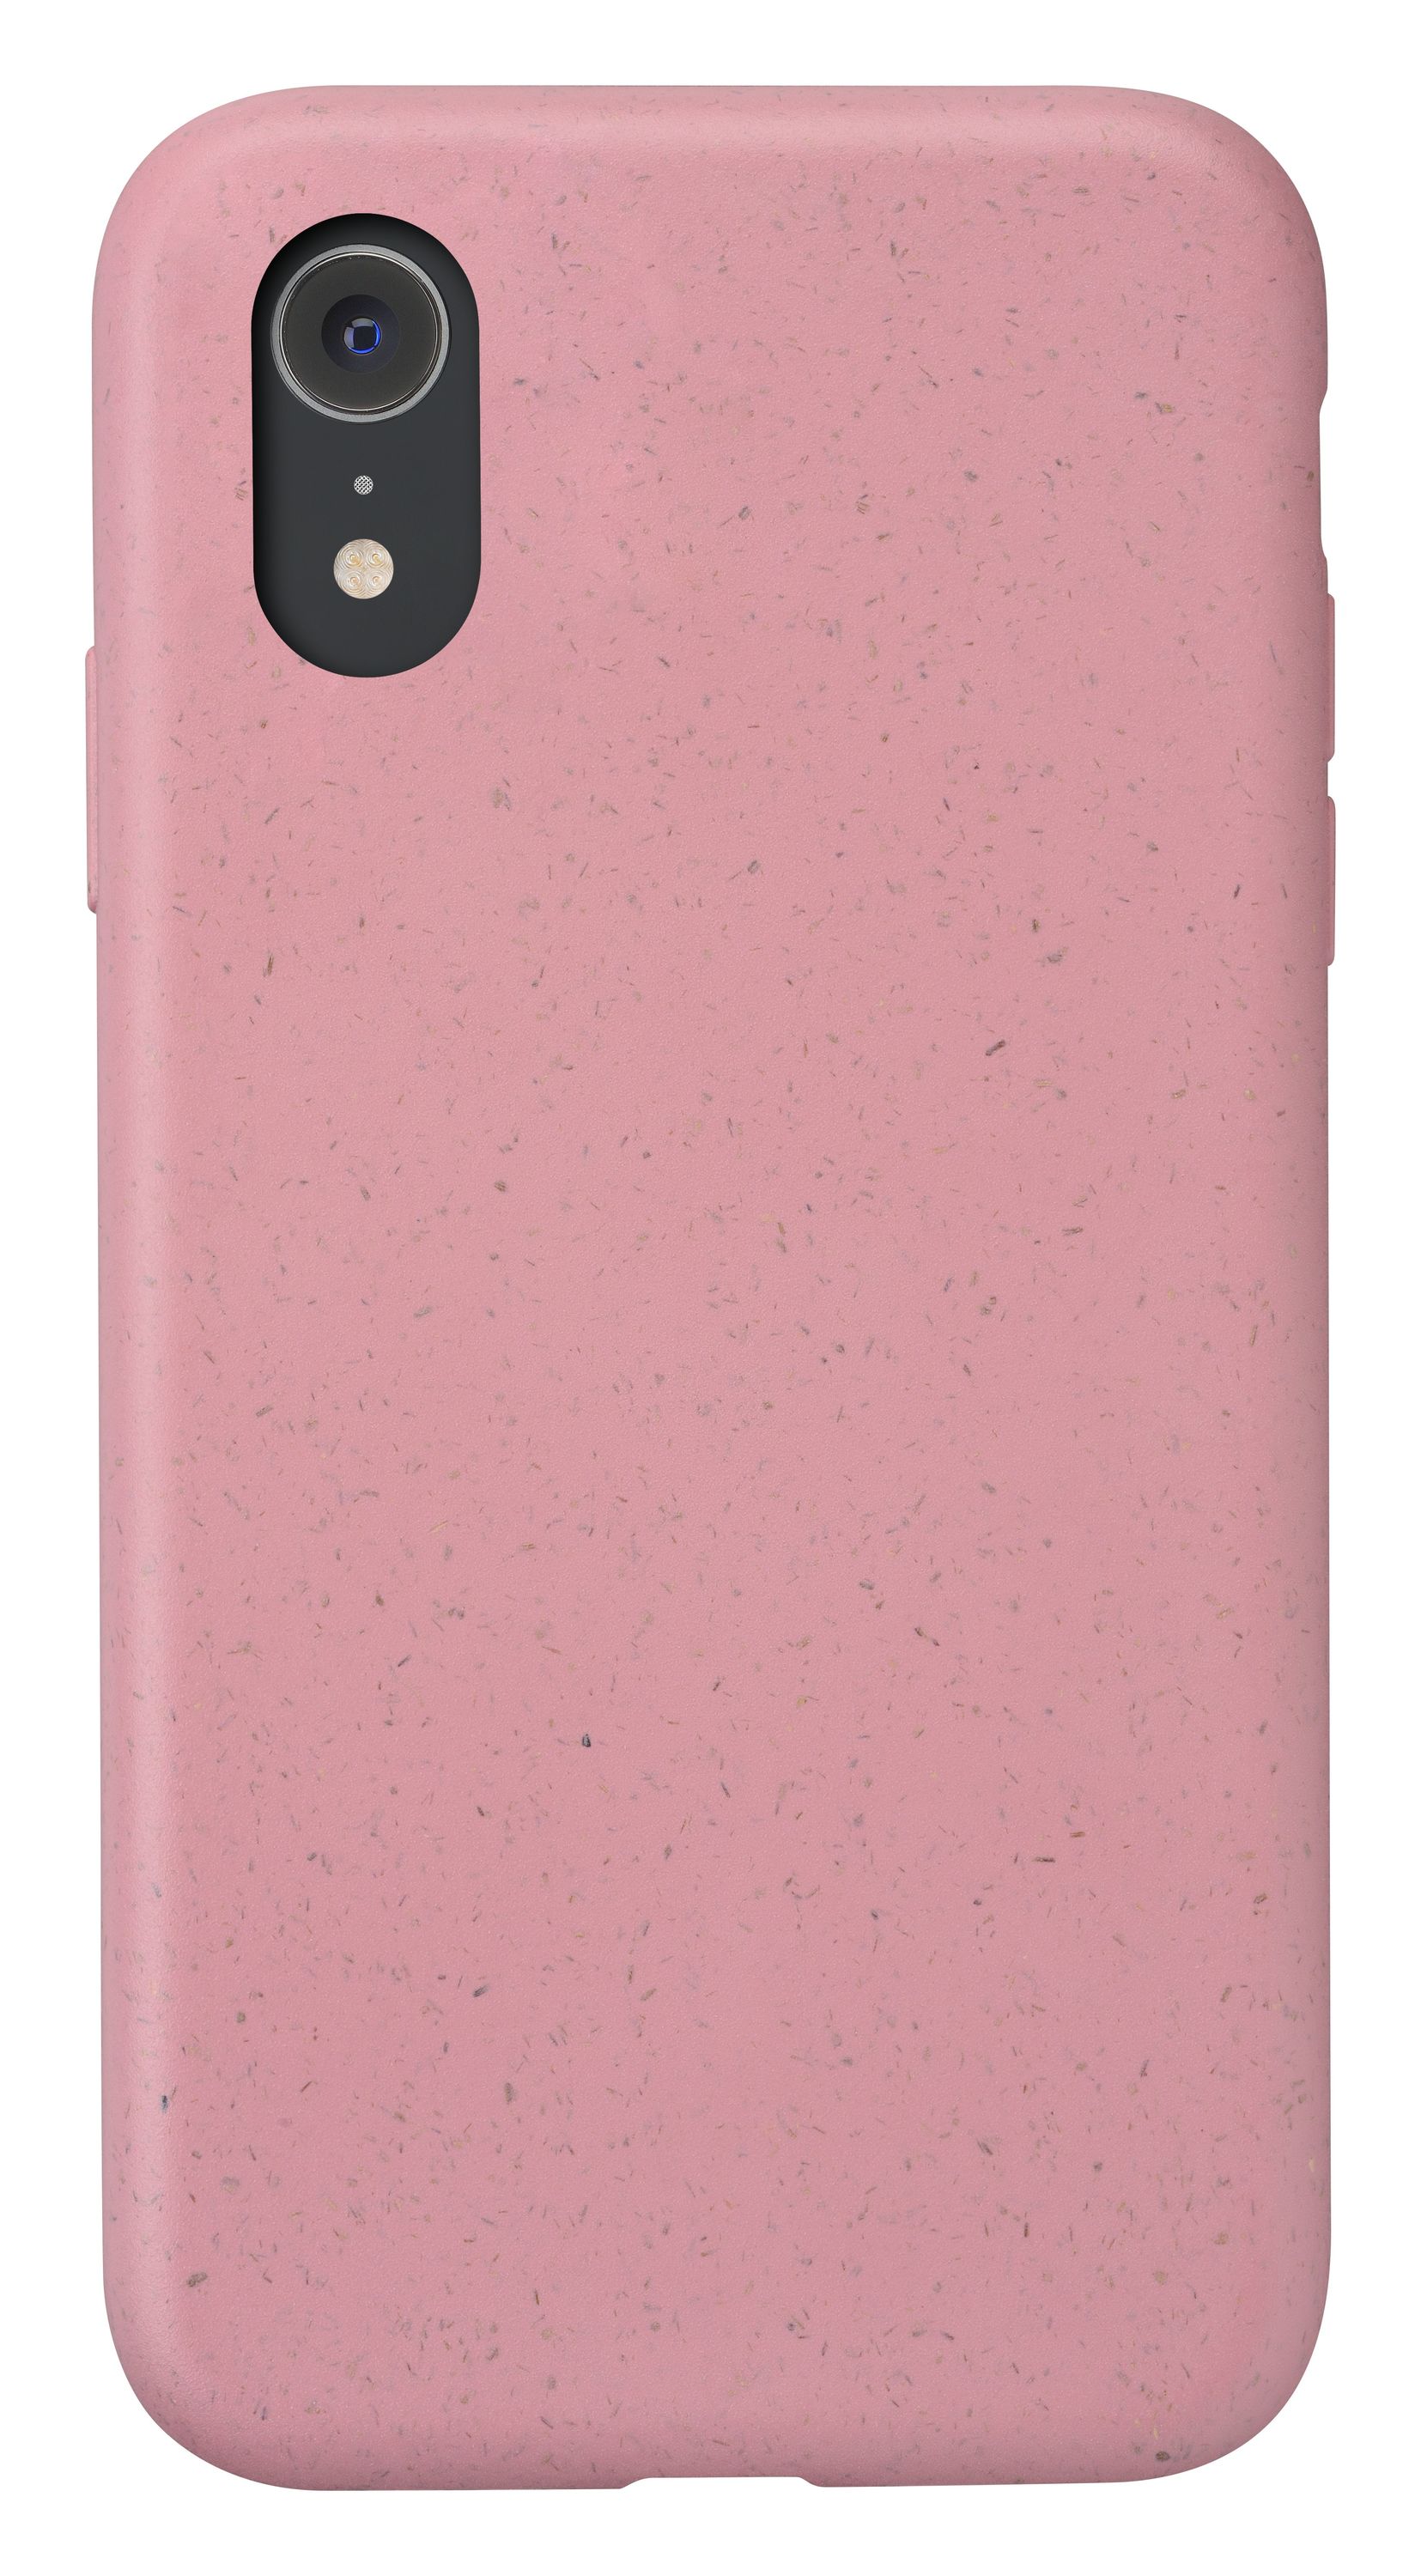 iPhone Xr, case become, pink